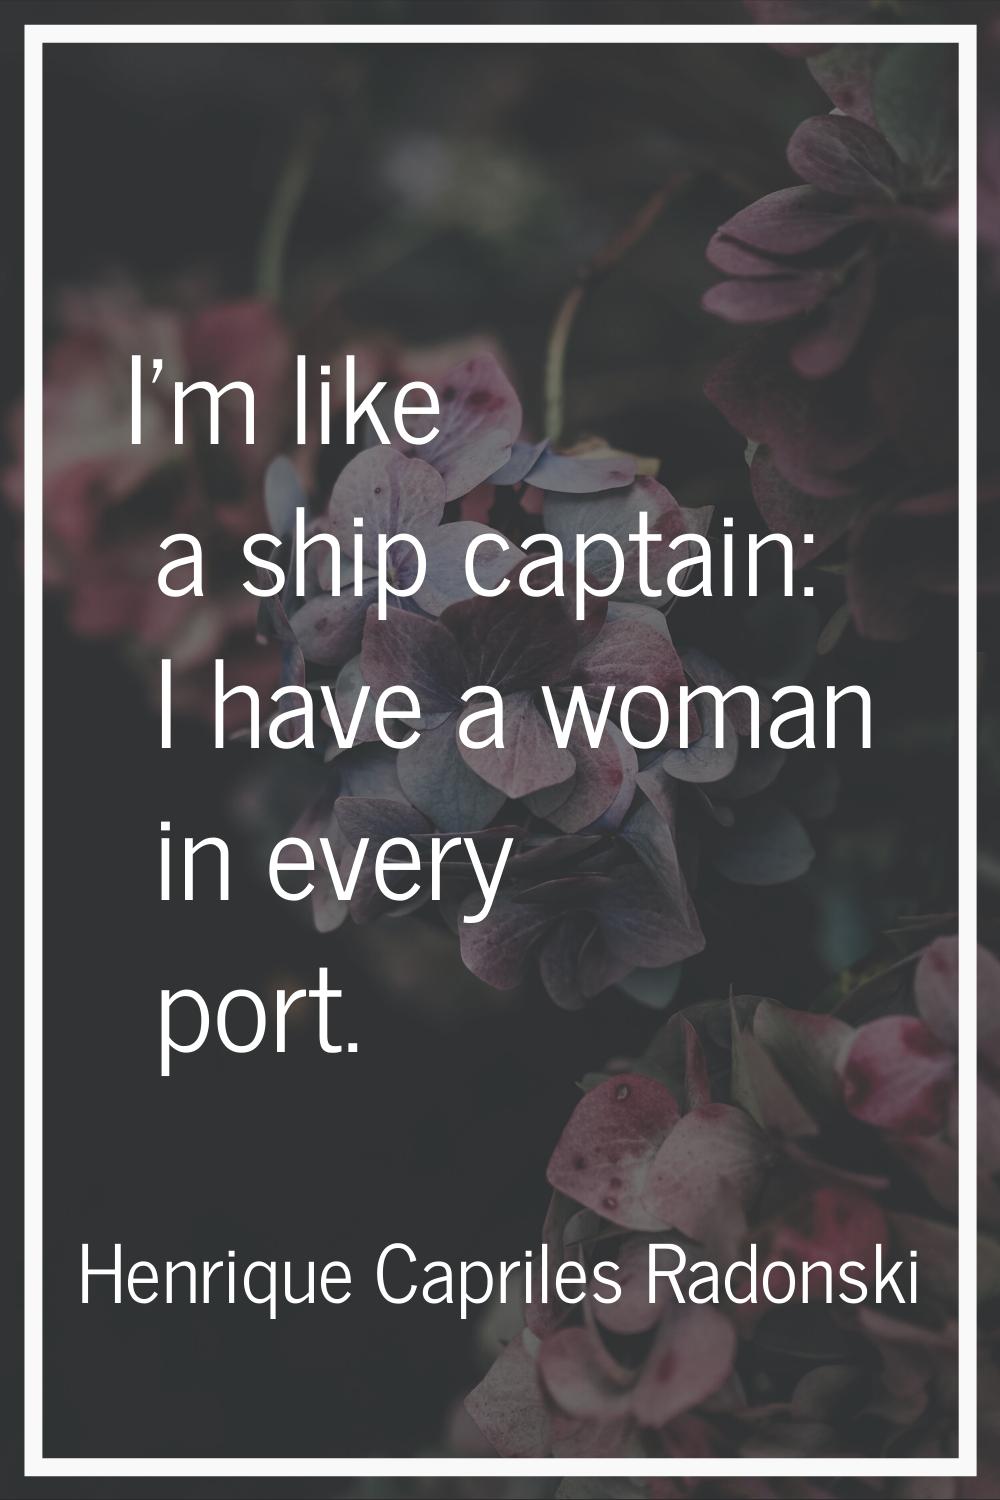 I'm like a ship captain: I have a woman in every port.